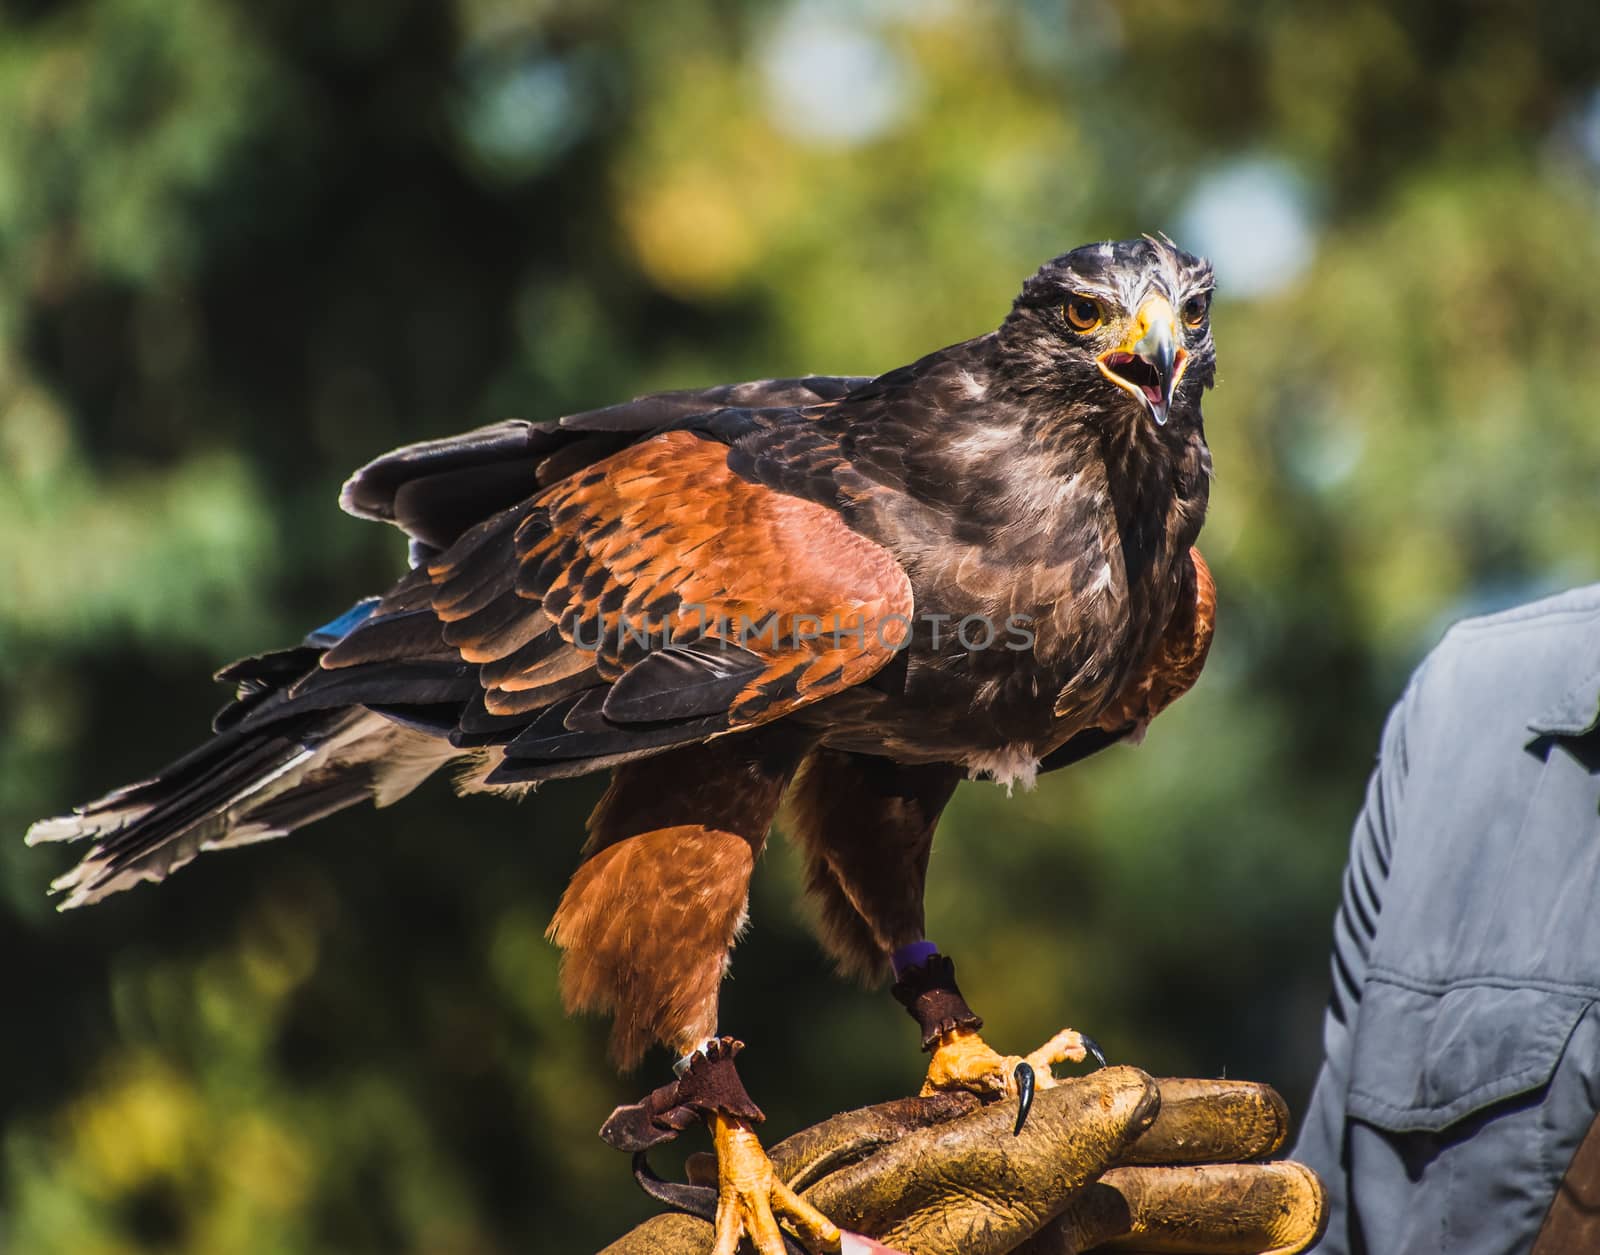 Harris's Hawk on Falconry Glove by raphtong